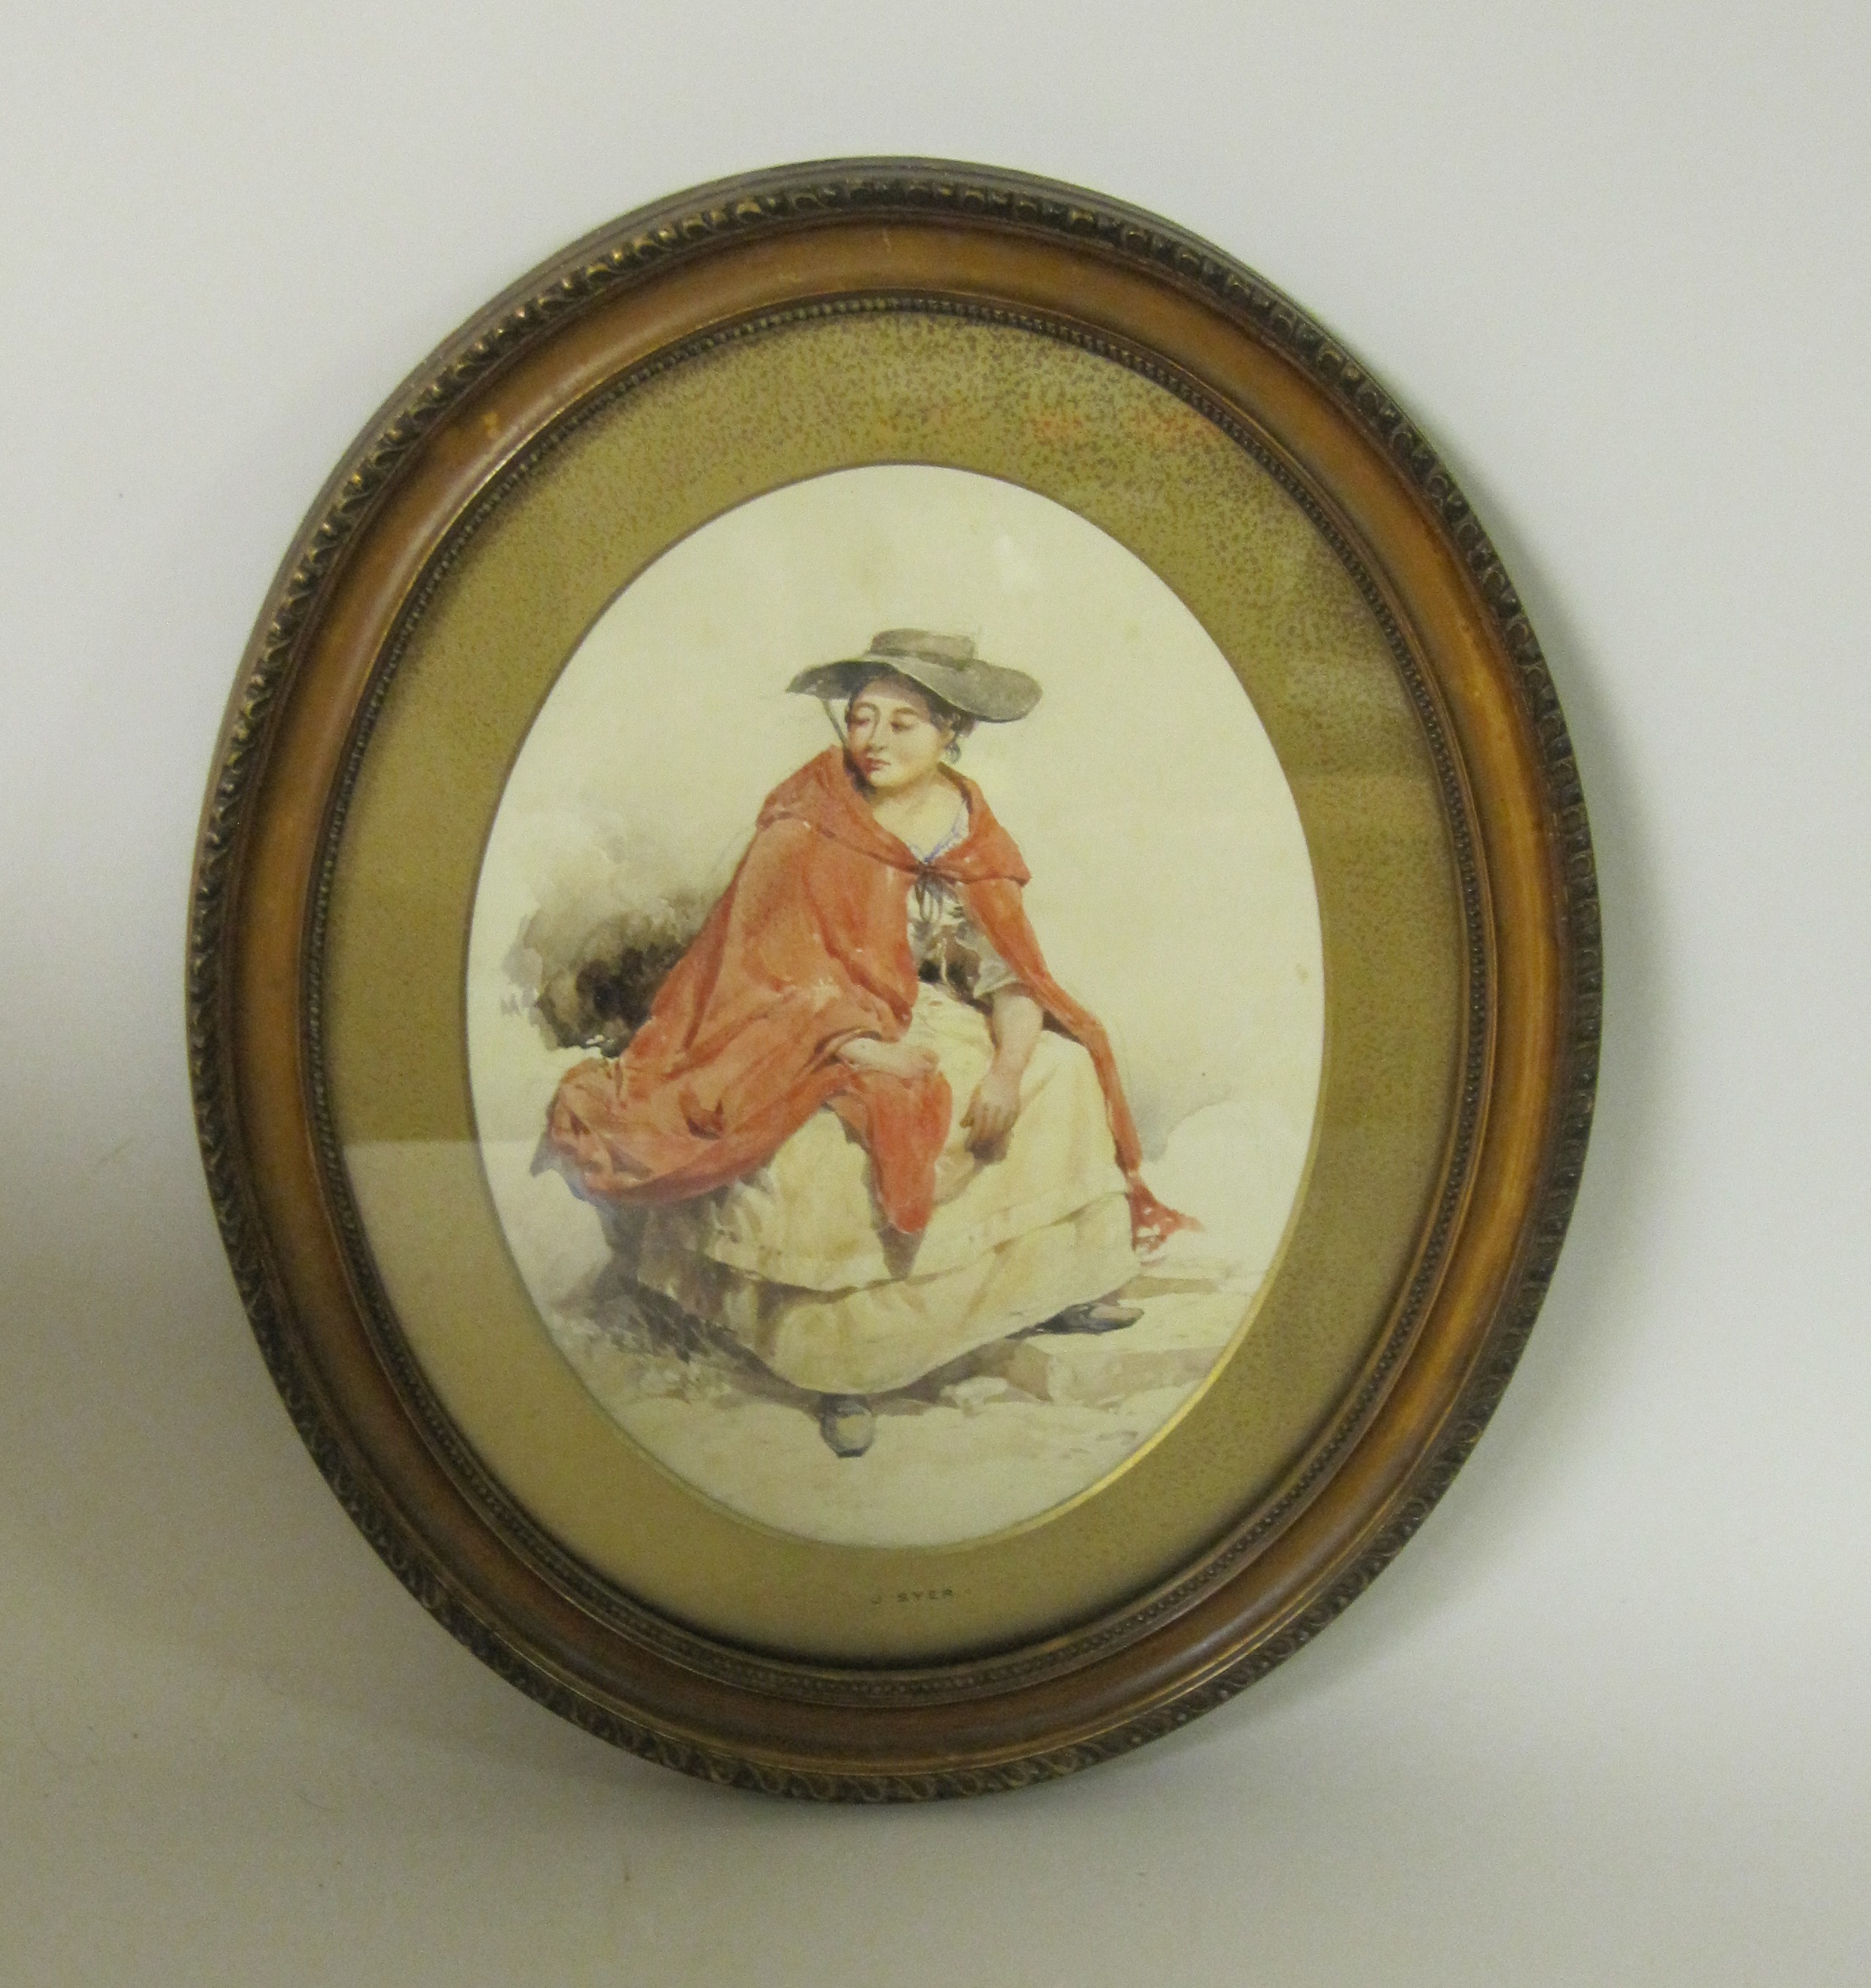 ATTRIBUTED TO JOHN SYER. 'At a Wayside', watercolour, oval, 11 1/2 x 8 1/2 in